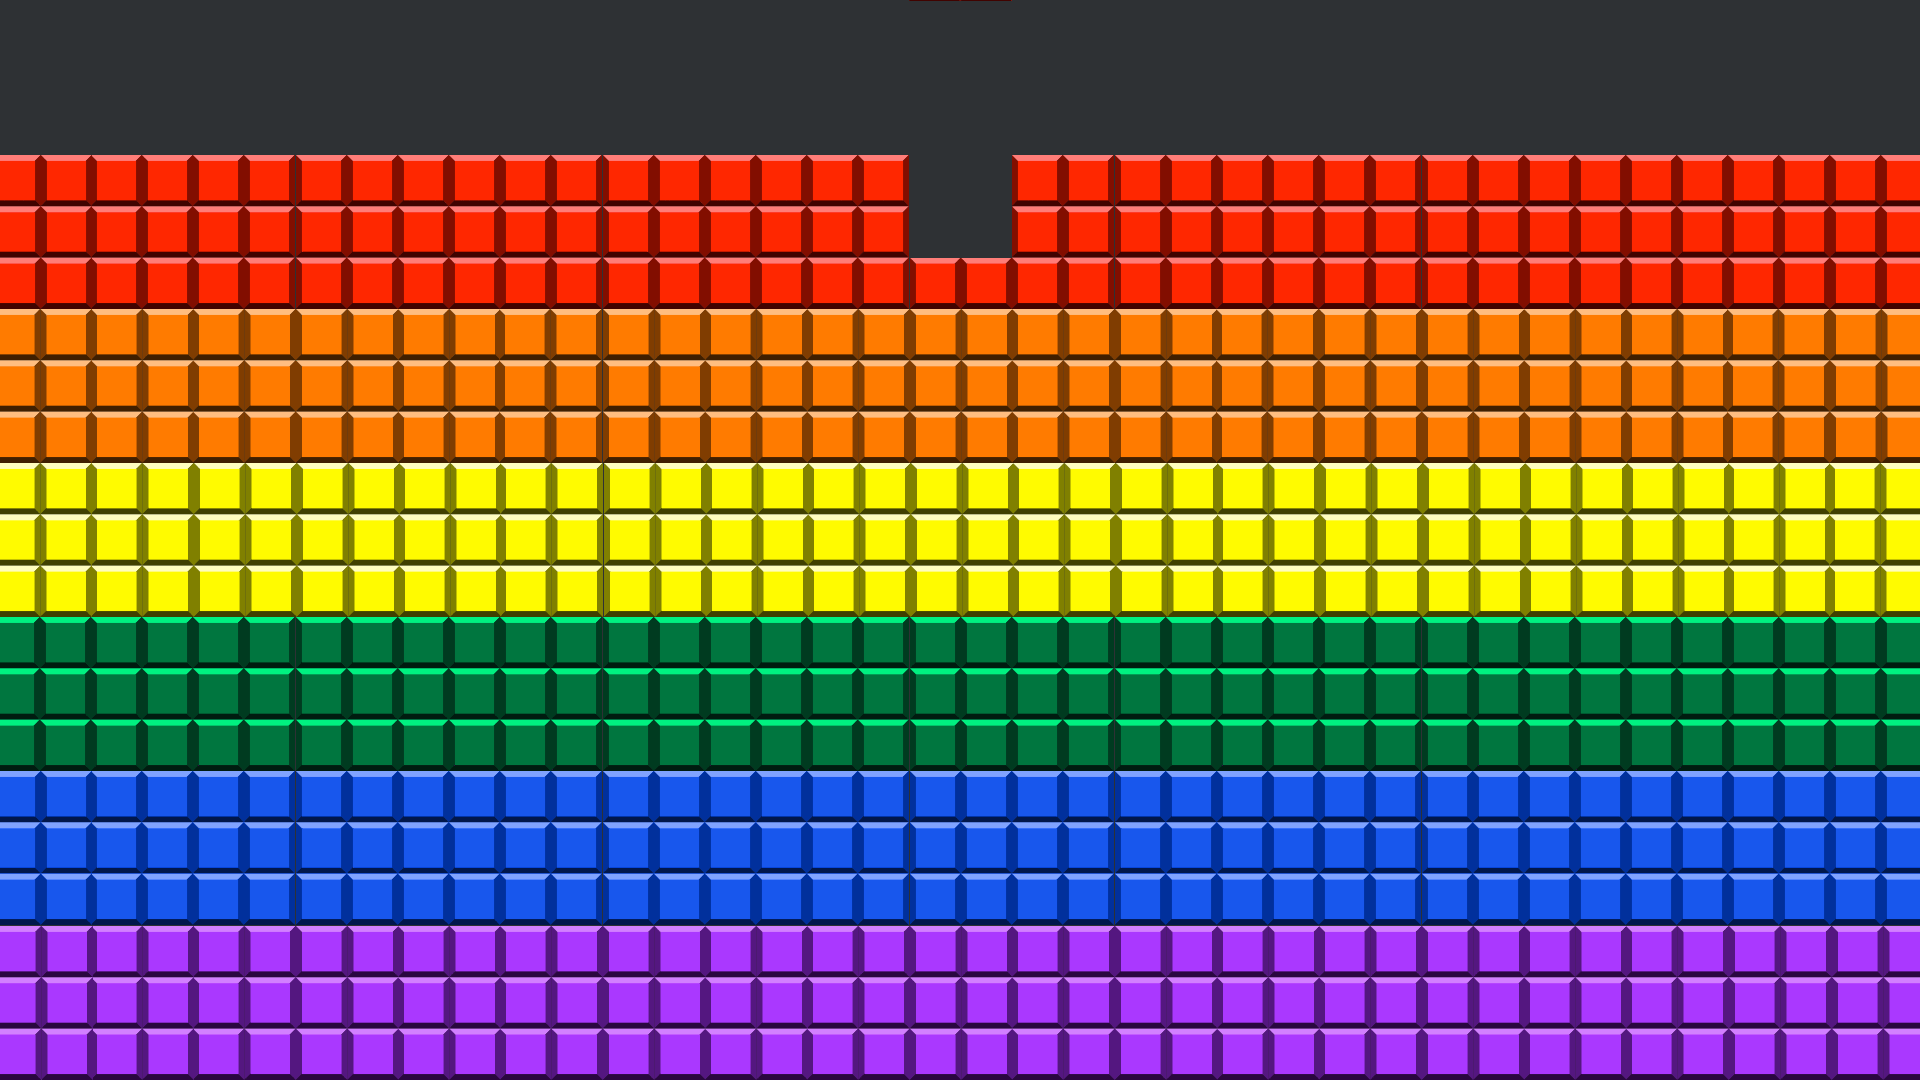 Illustration of tetromino in the shape of the pride flag with a square shape falling to complete the flag. 